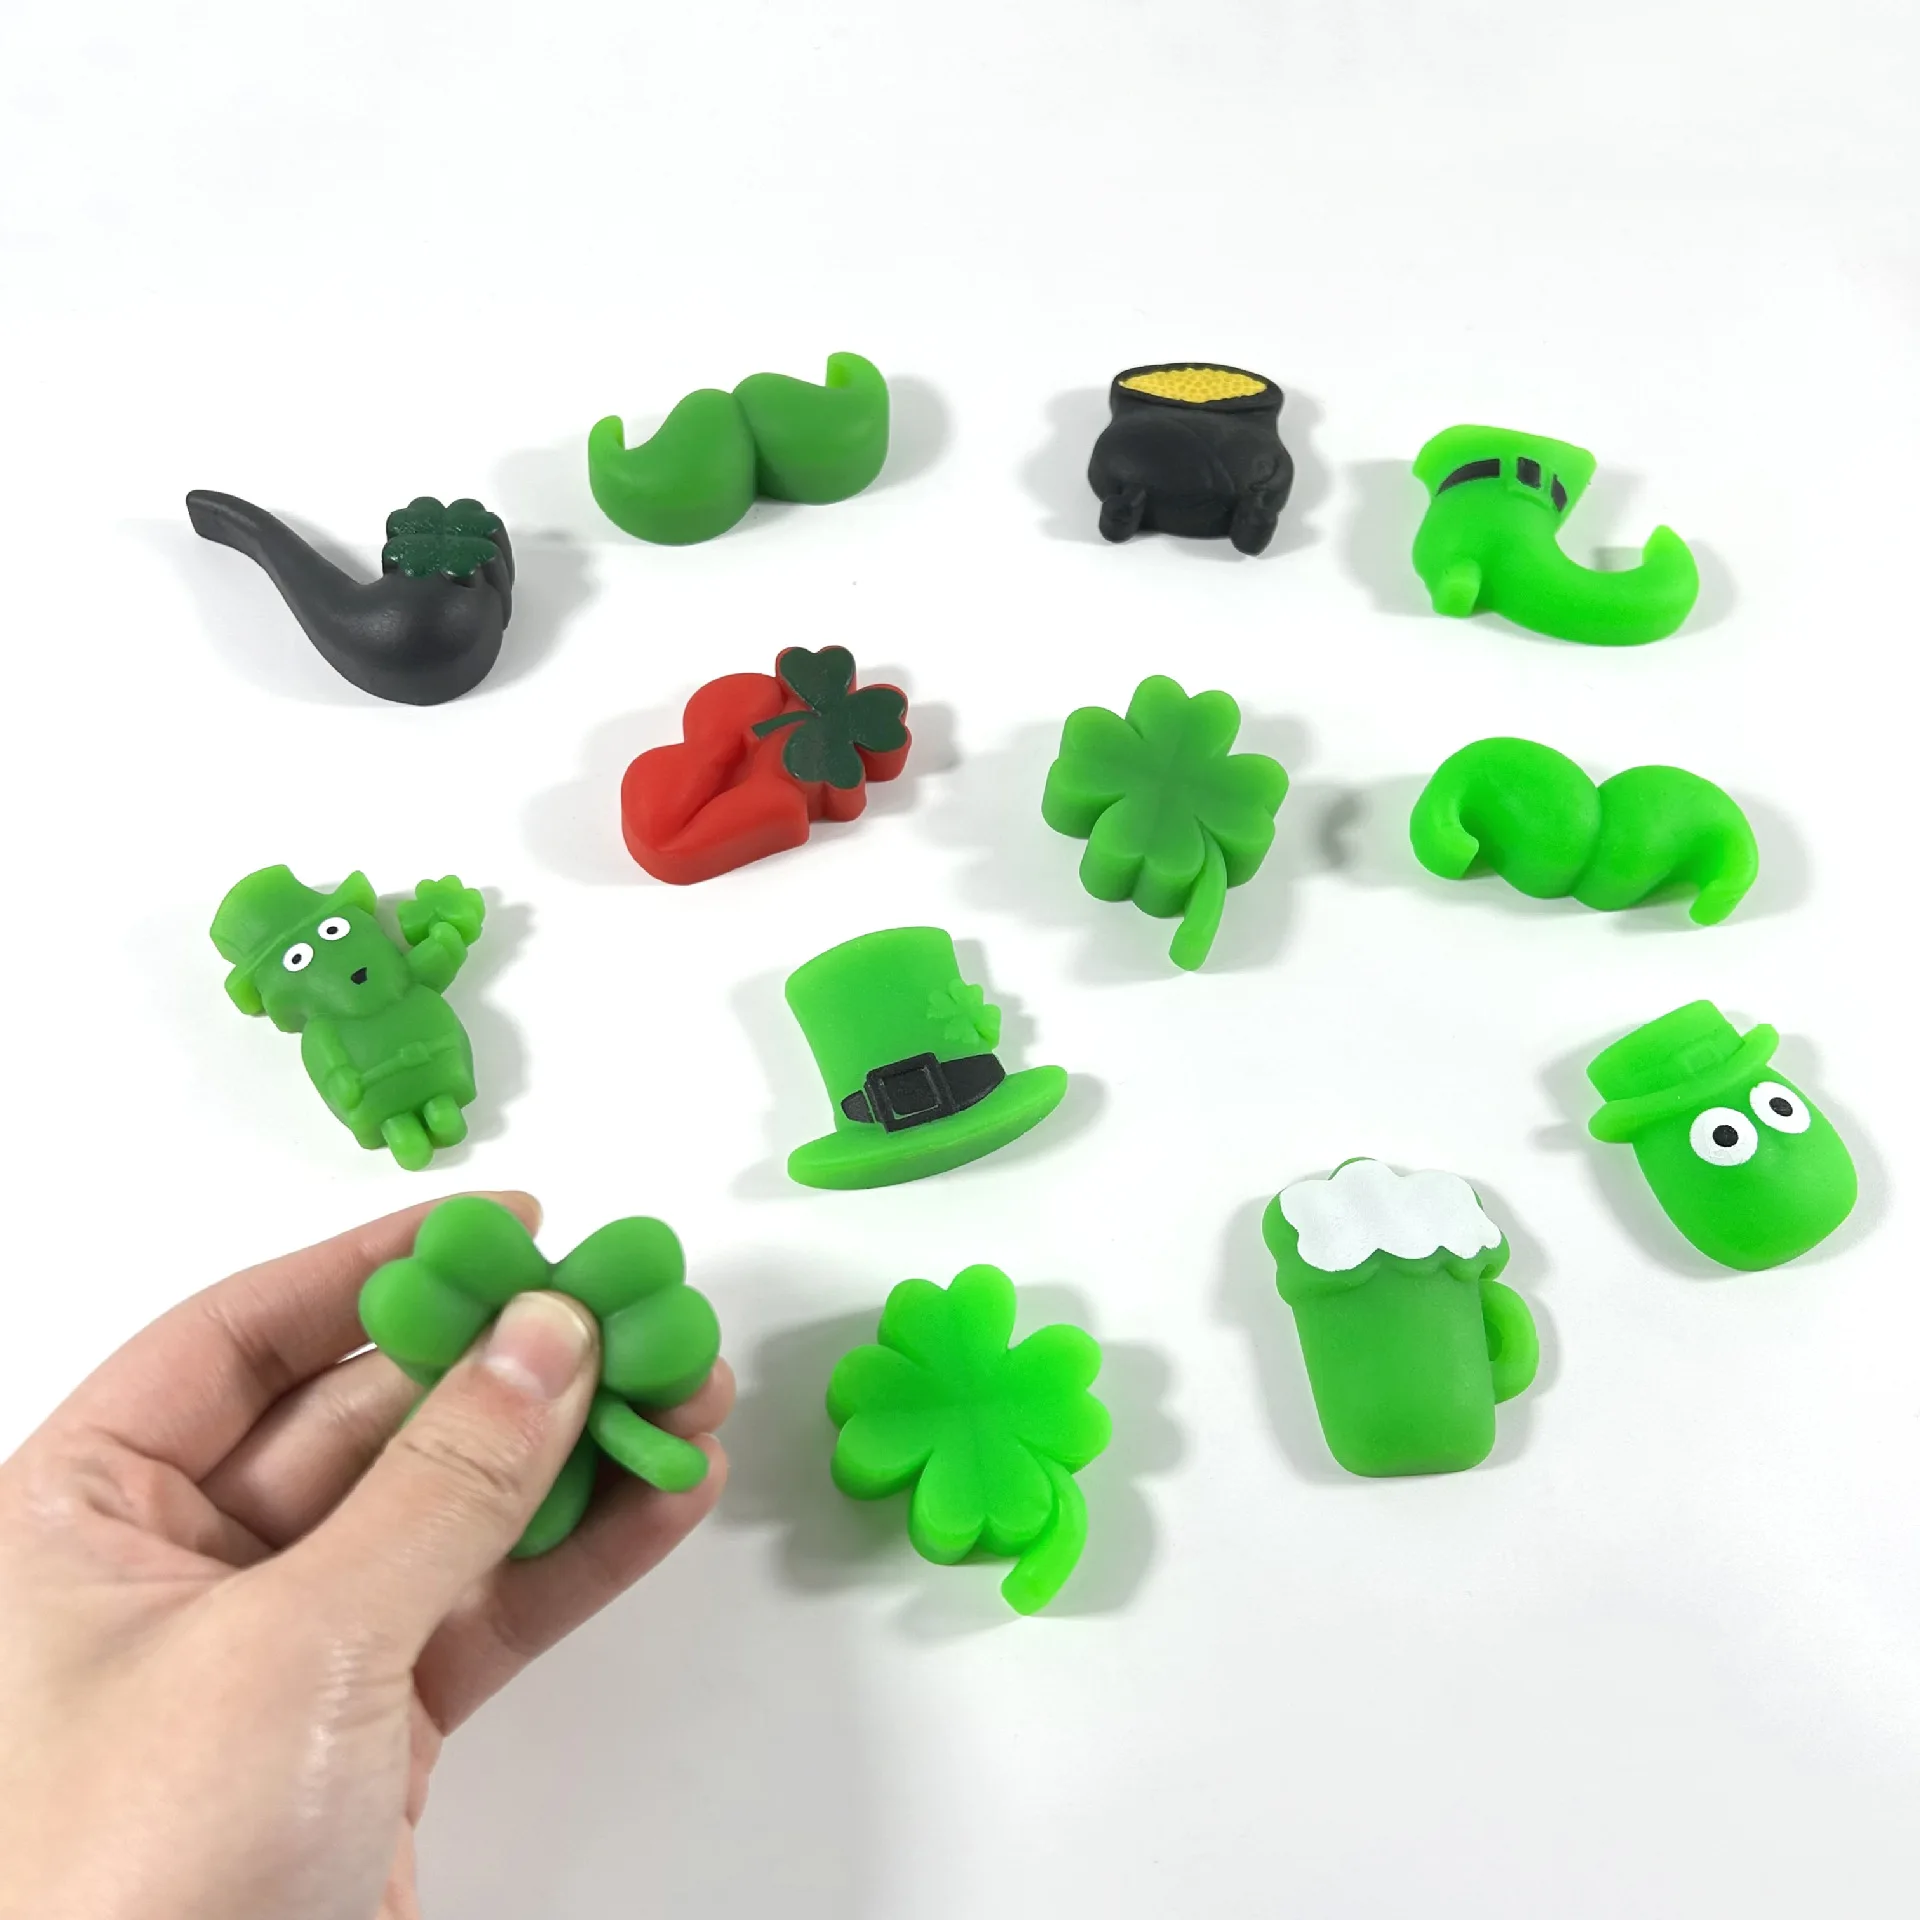 Mini Squishy Toys Squeeze Fidget Stress Relief Toy Party Favor for Kids St. Patrick's Day Gifts Mini Squishy Toys